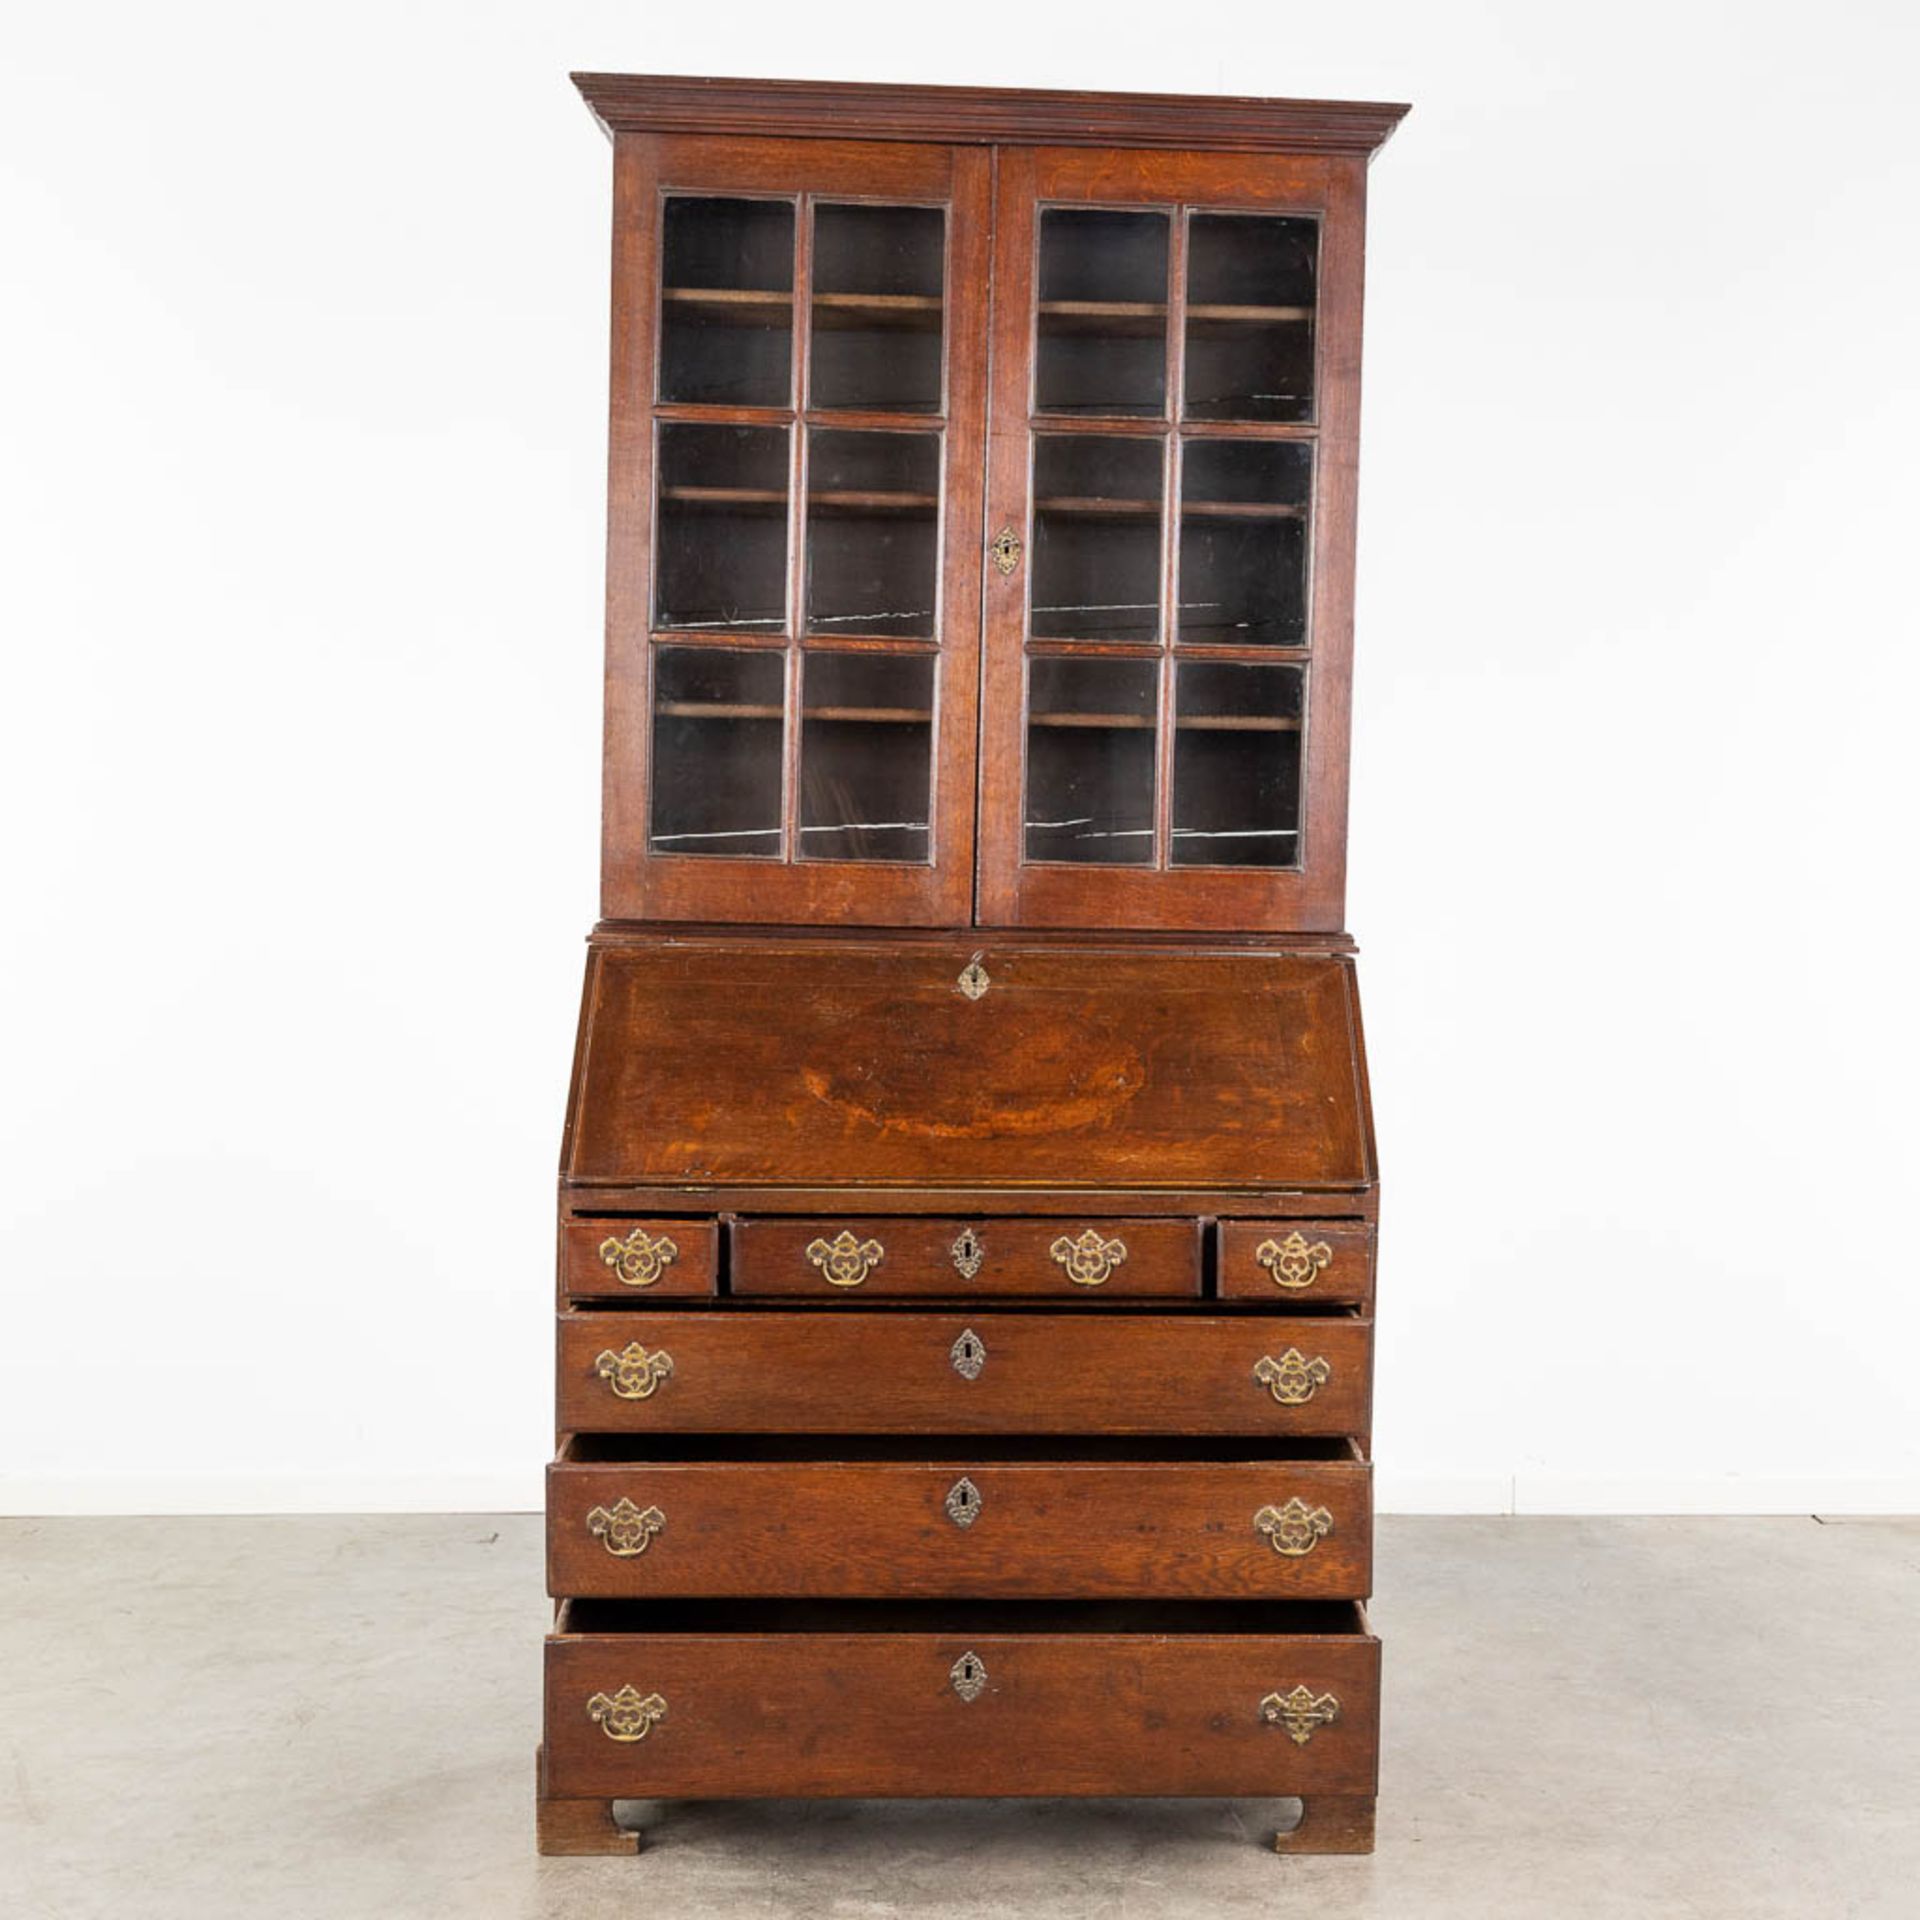 A secretaire with a display cabinet/library, oak, 19th C. (L: 98 x W: 57 x H: 212 cm) - Image 3 of 14